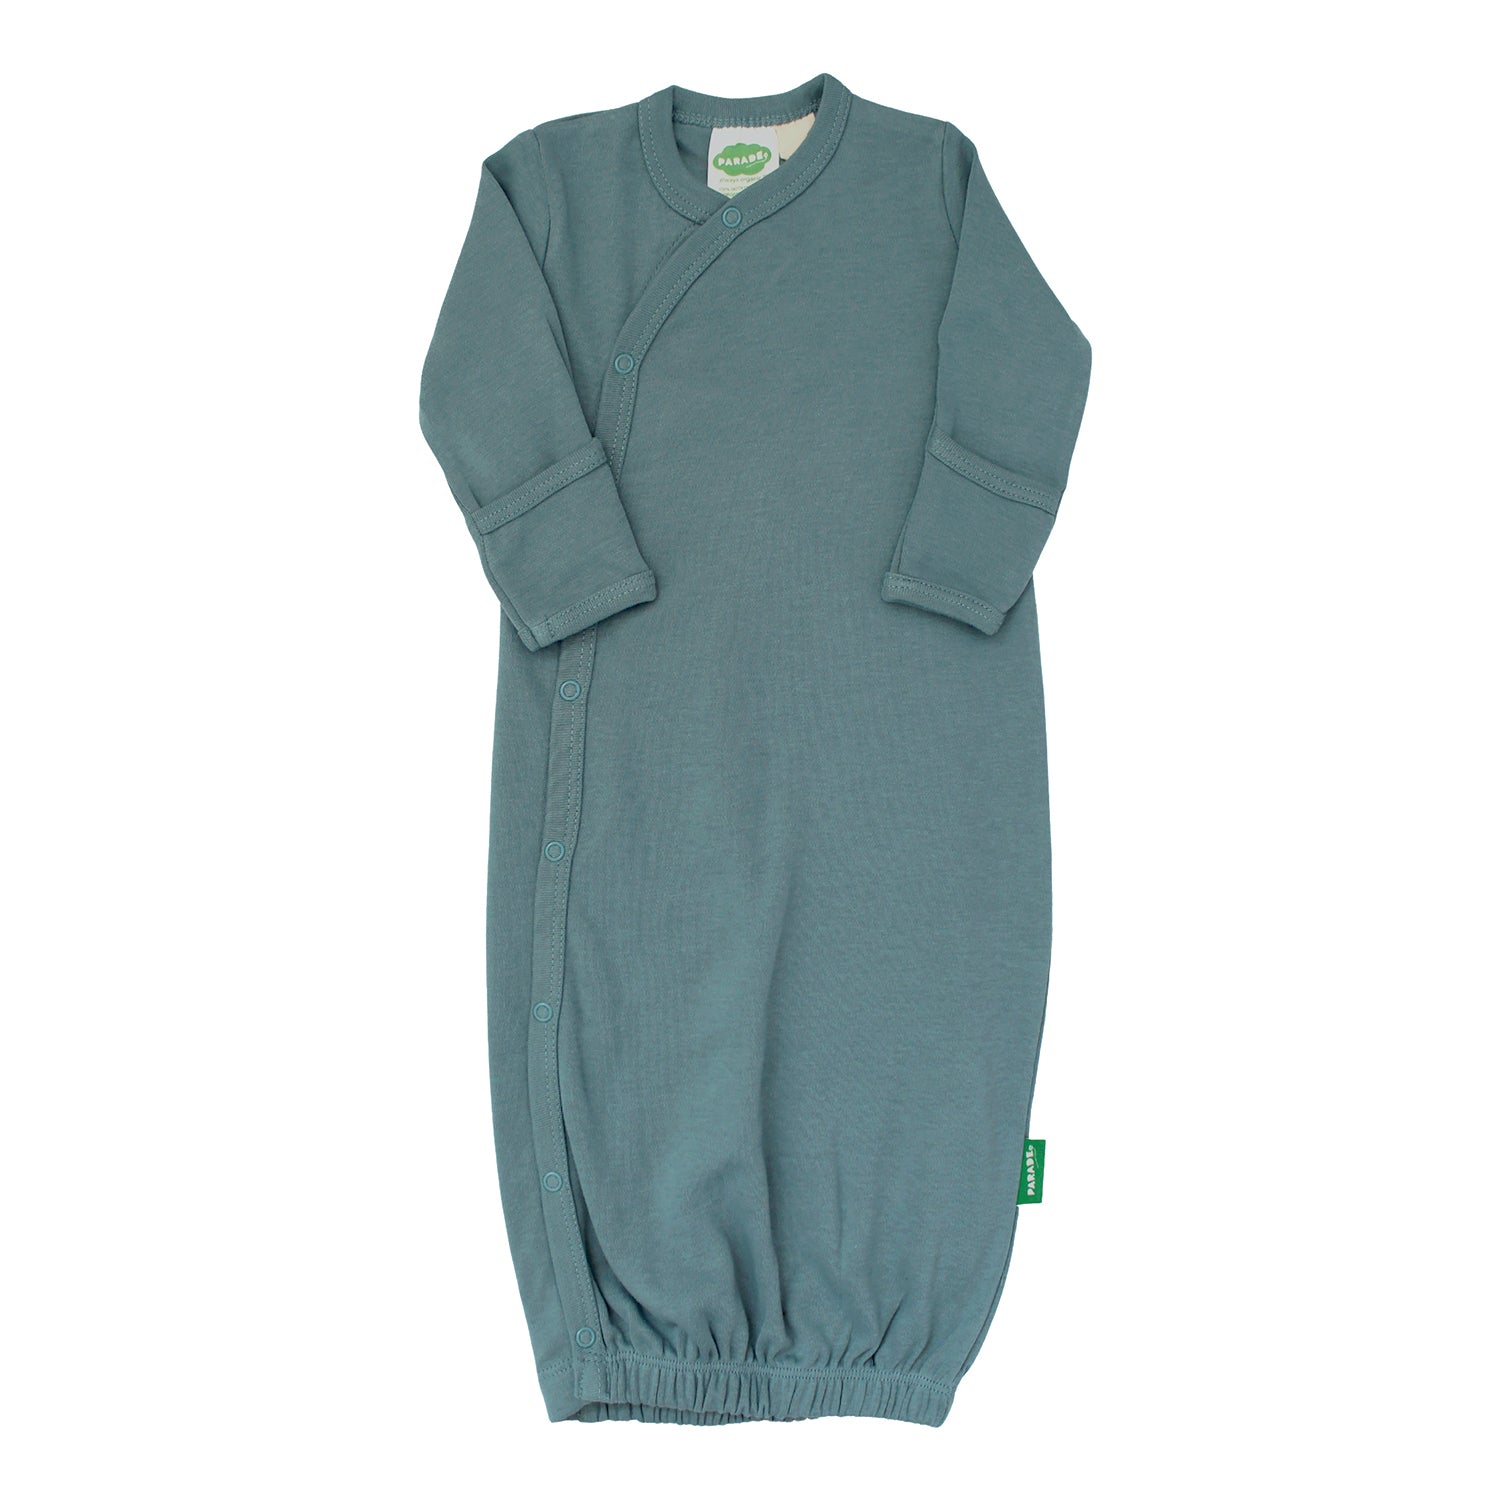 Kimono Gowns - Essentials - Organic Baby Clothes, Kids Clothes, & Gifts | Parade Organics